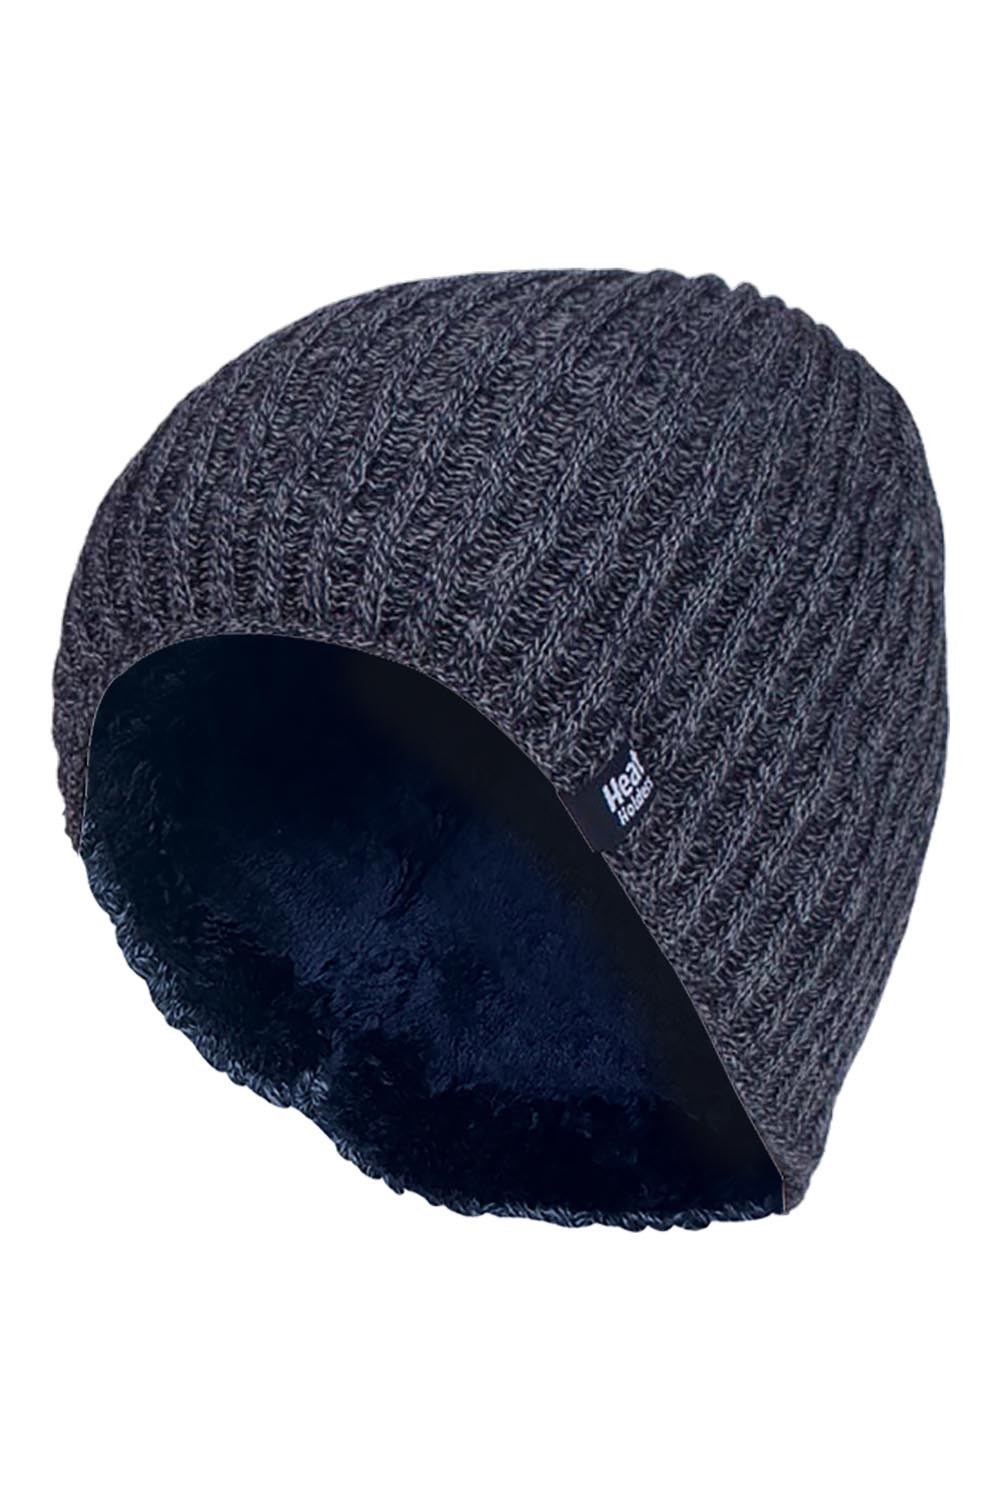 Mens Ribbed Winter Thermal Beanie Hat -